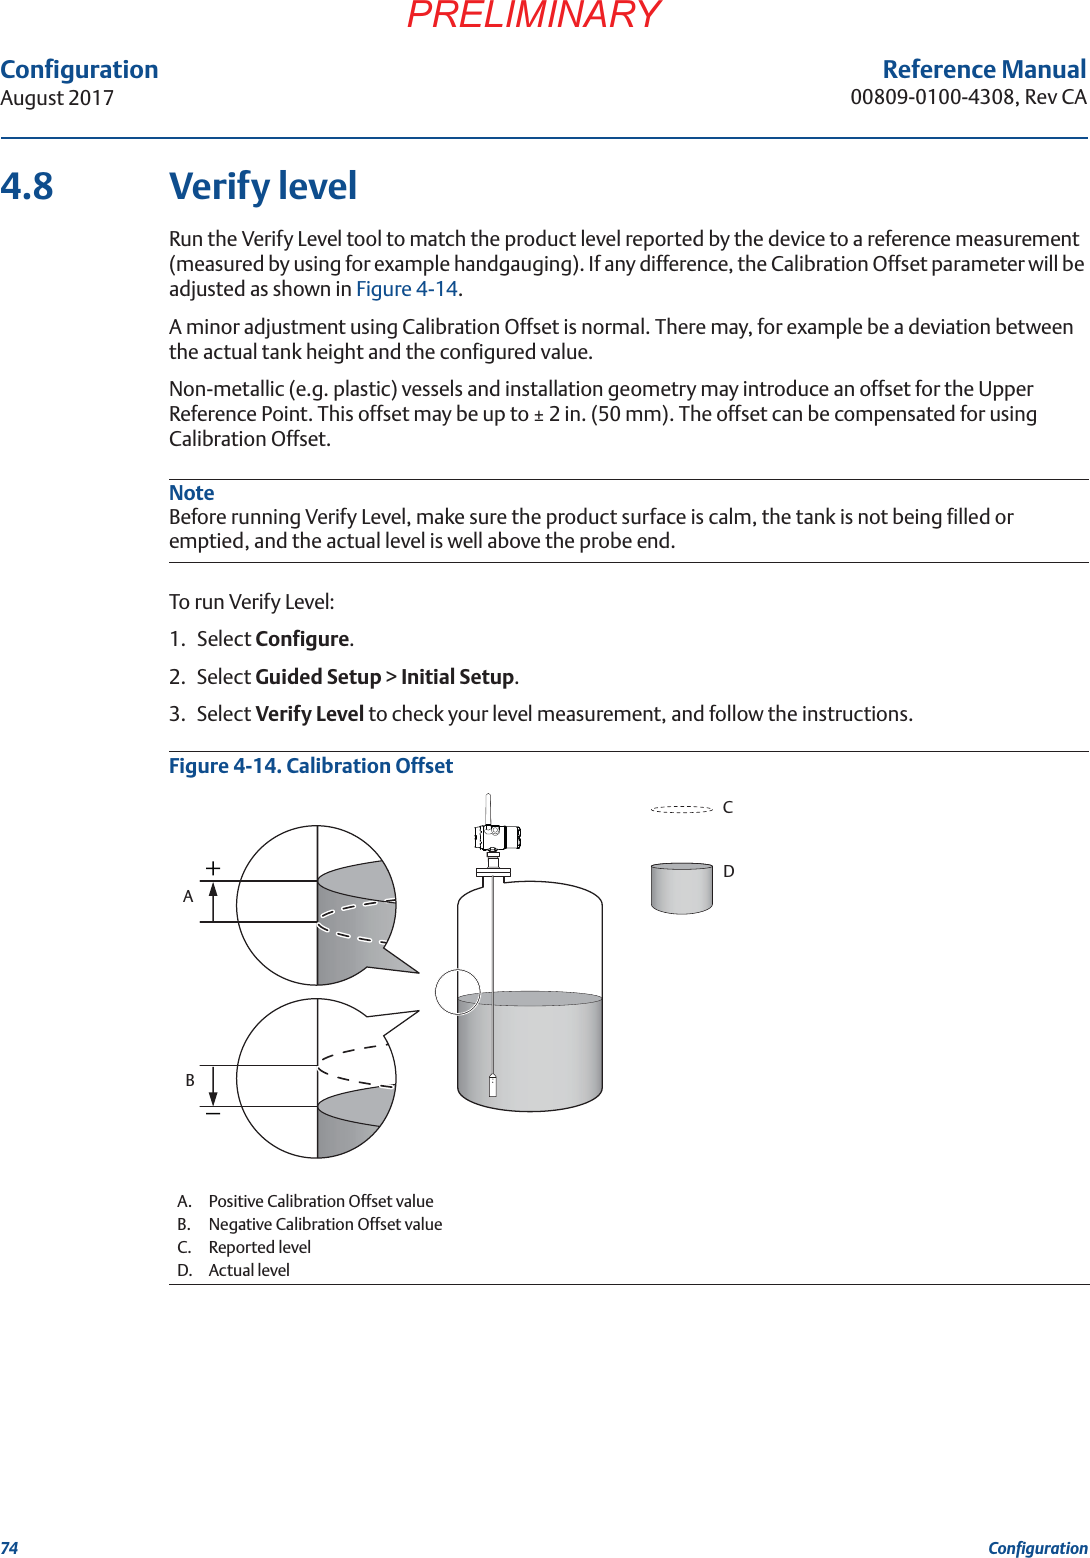 74ConfigurationAugust 2017ConfigurationPRELIMINARYReference Manual00809-0100-4308, Rev CA4.8 Verify levelRun the Verify Level tool to match the product level reported by the device to a reference measurement (measured by using for example handgauging). If any difference, the Calibration Offset parameter will be adjusted as shown in Figure 4-14.A minor adjustment using Calibration Offset is normal. There may, for example be a deviation between the actual tank height and the configured value.Non-metallic (e.g. plastic) vessels and installation geometry may introduce an offset for the Upper Reference Point. This offset may be up to ± 2 in. (50 mm). The offset can be compensated for using Calibration Offset.NoteBefore running Verify Level, make sure the product surface is calm, the tank is not being filled or emptied, and the actual level is well above the probe end.To run Verify Level:1. Select Configure.2. Select Guided Setup &gt; Initial Setup.3. Select Verify Level to check your level measurement, and follow the instructions.Figure 4-14. Calibration OffsetA. Positive Calibration Offset valueB. Negative Calibration Offset valueC. Reported levelD. Actual levelCDAB